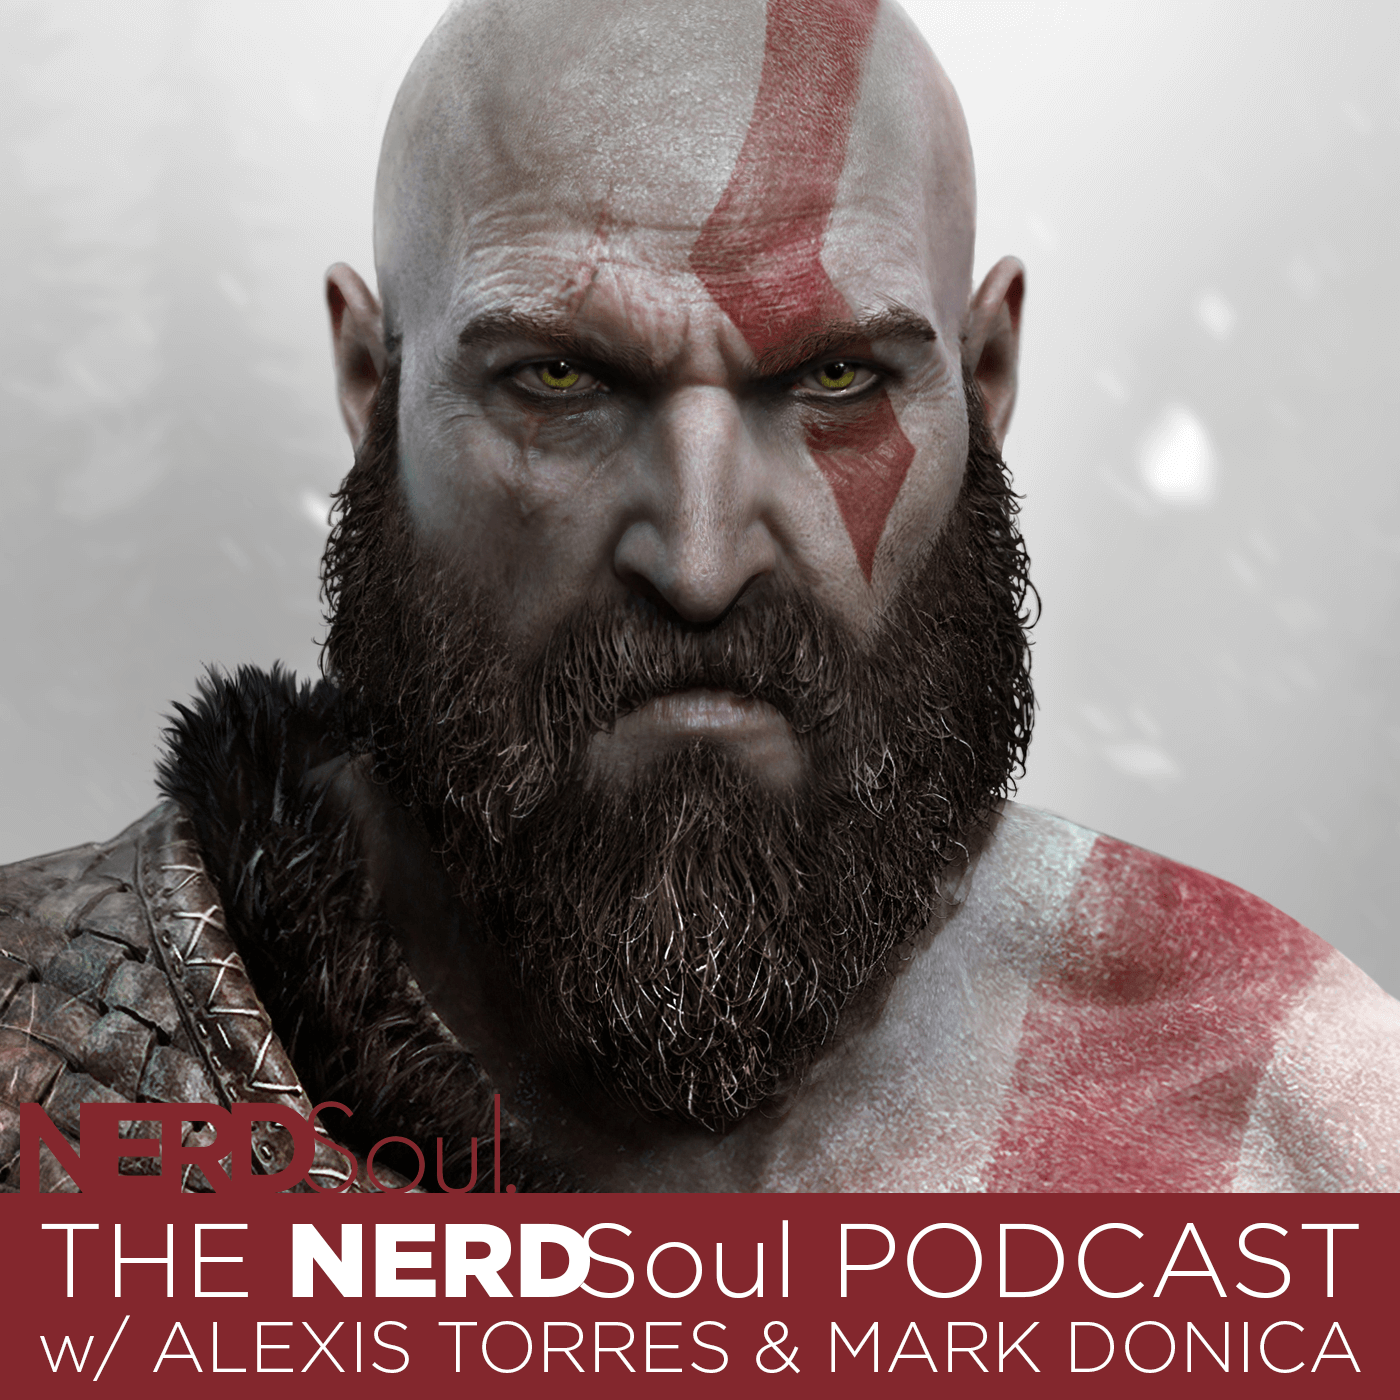 MIB's Sony Doing The Right Thing w/ Men In Black, BTS Appreciation Post, God of War Mini-Review & More on The #NERDSoul #Podcast